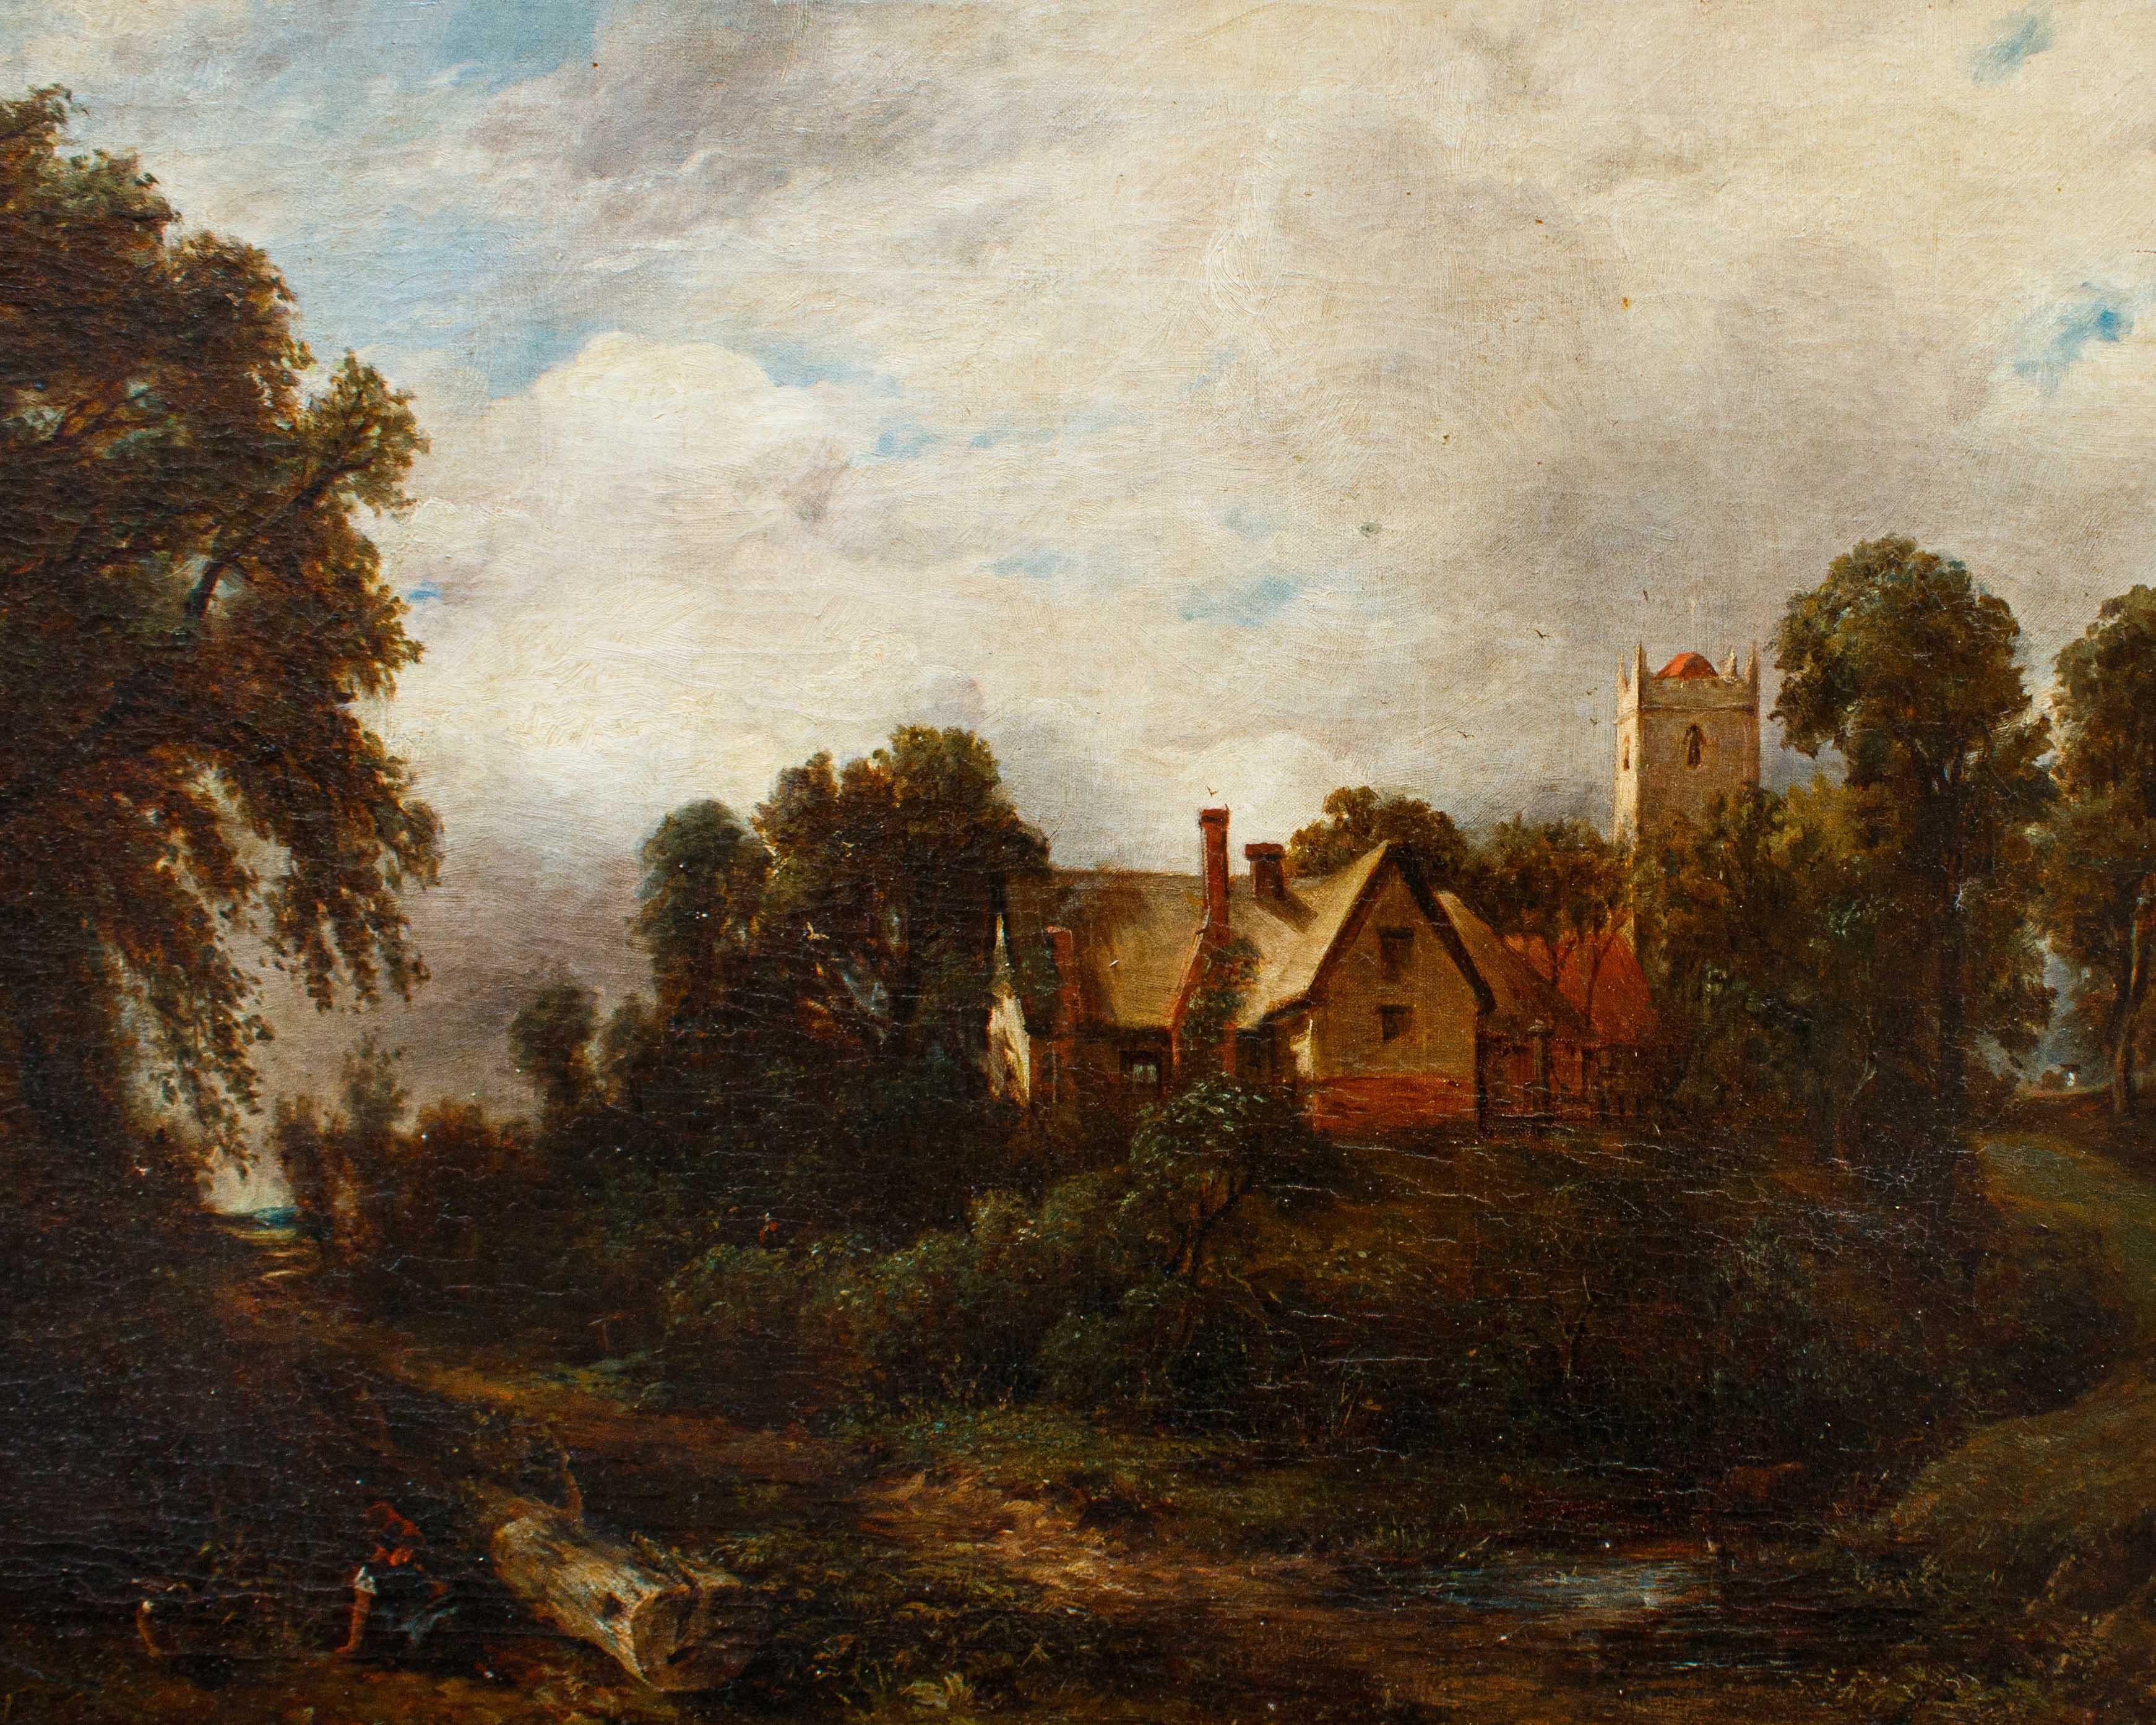 19th Century English Landscape Painting Oil on Canvas For Sale 1